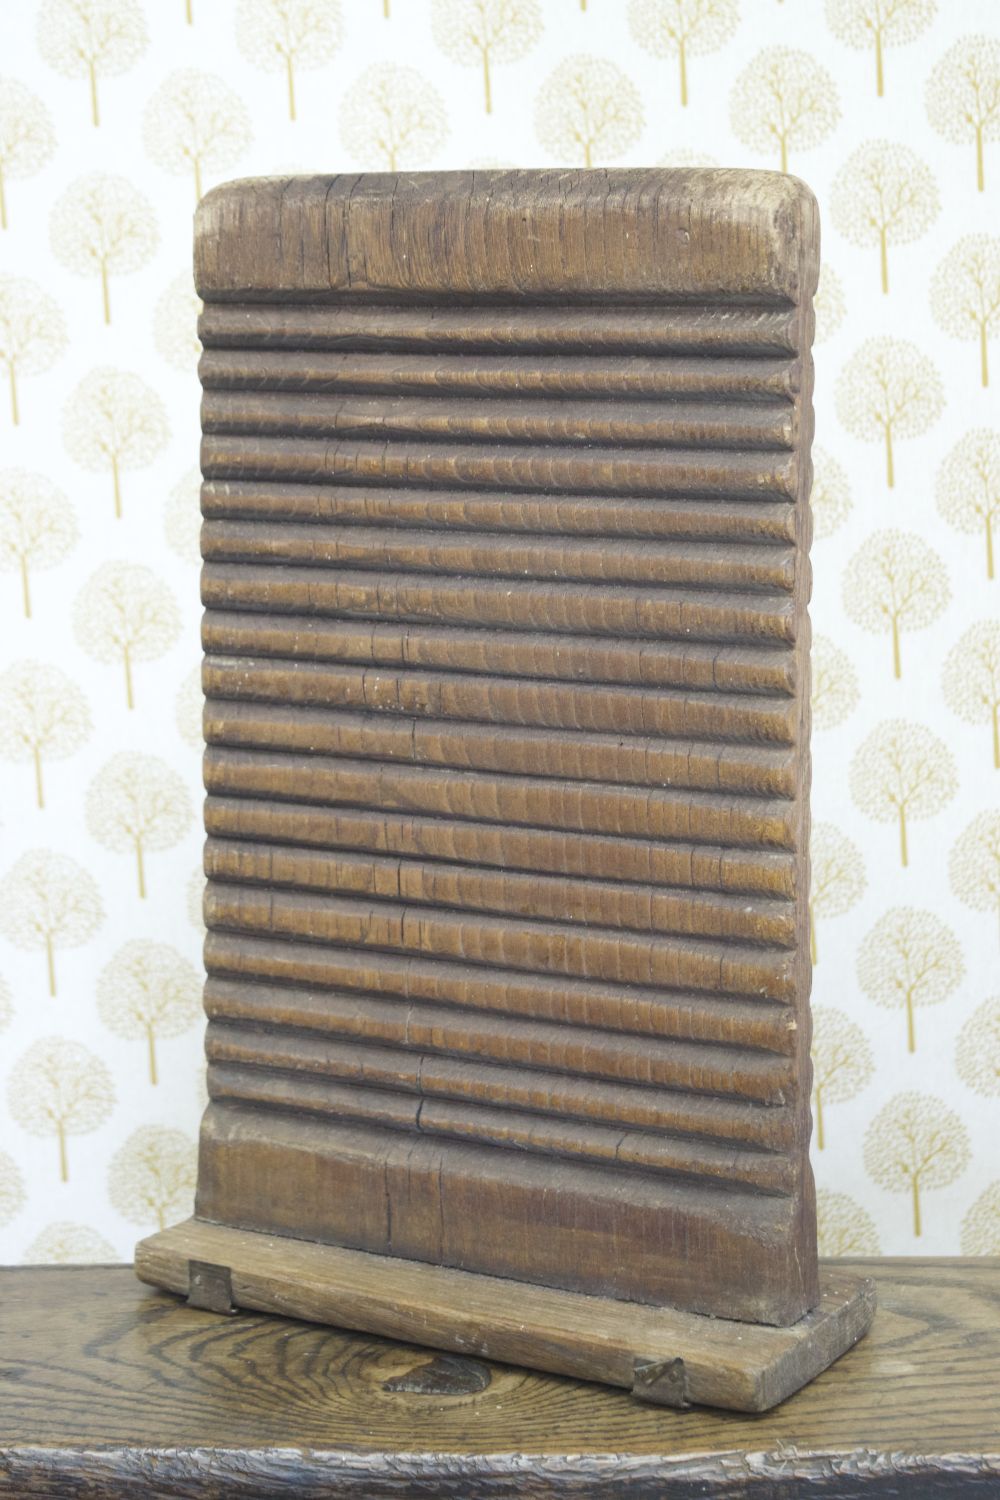 19TH-CENTURY CARVED ASH CLOTHES WASHING BOARD